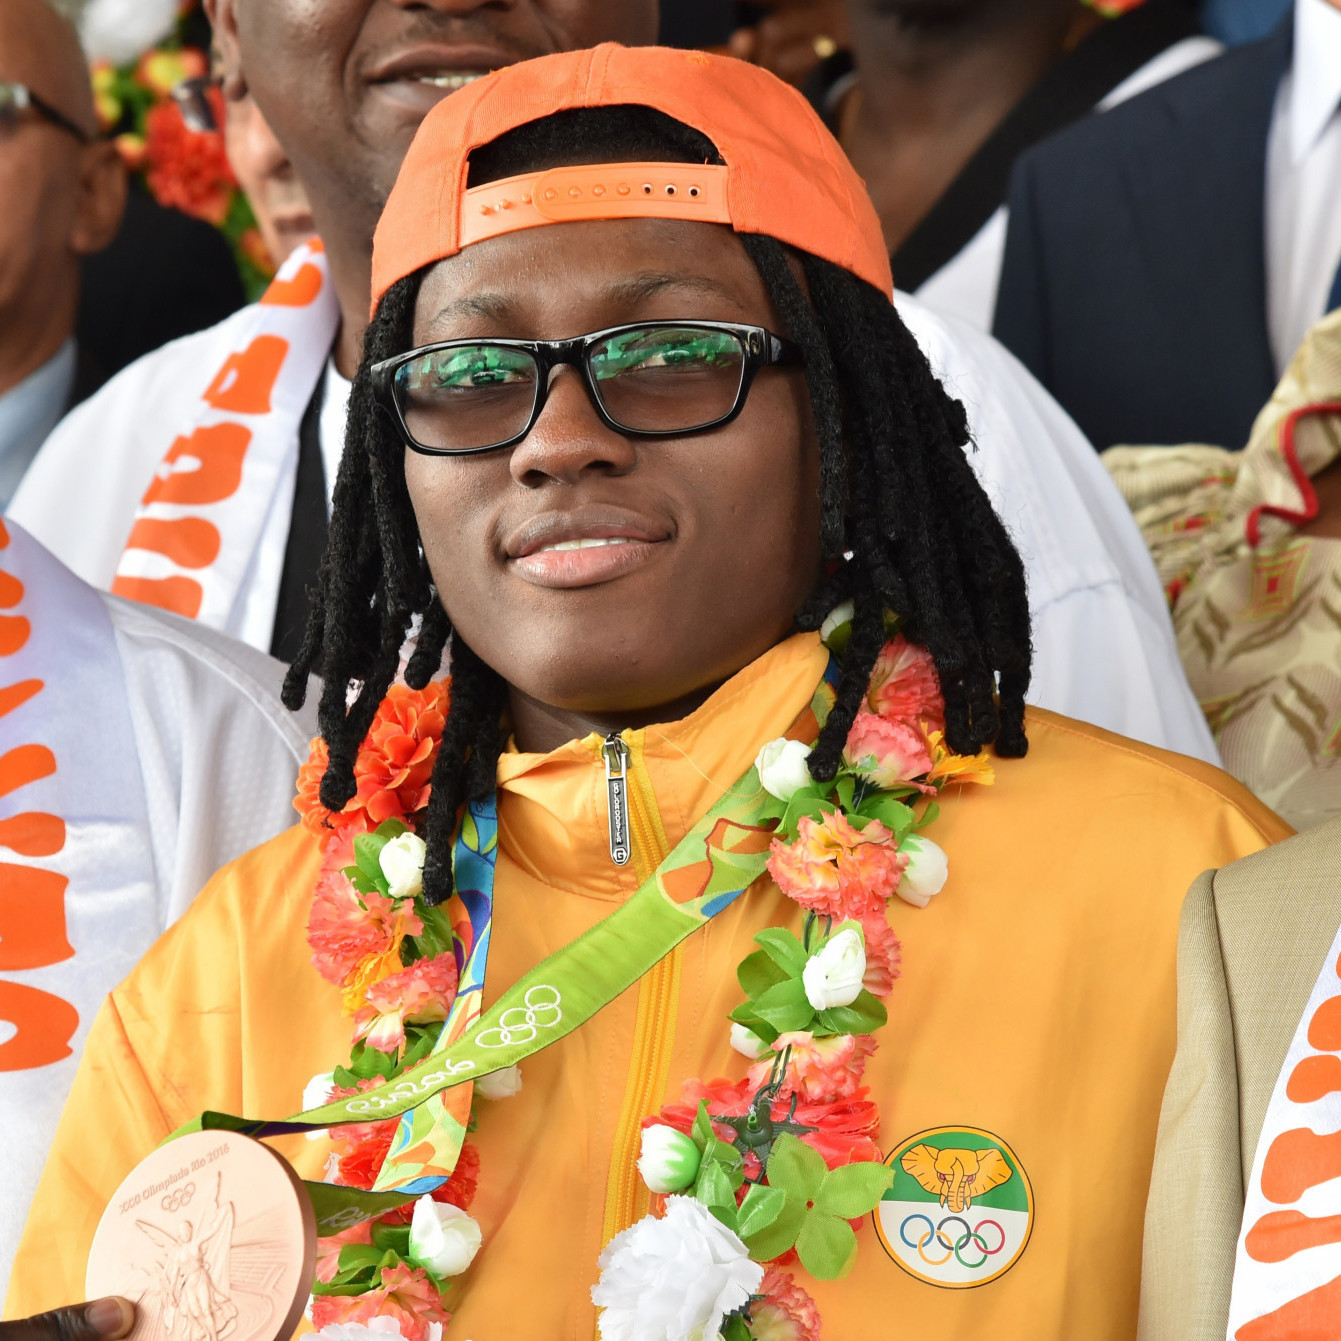 Ruth Gbagbi has achieved notable success for Ivory Coast in taekwondo ©Getty Images